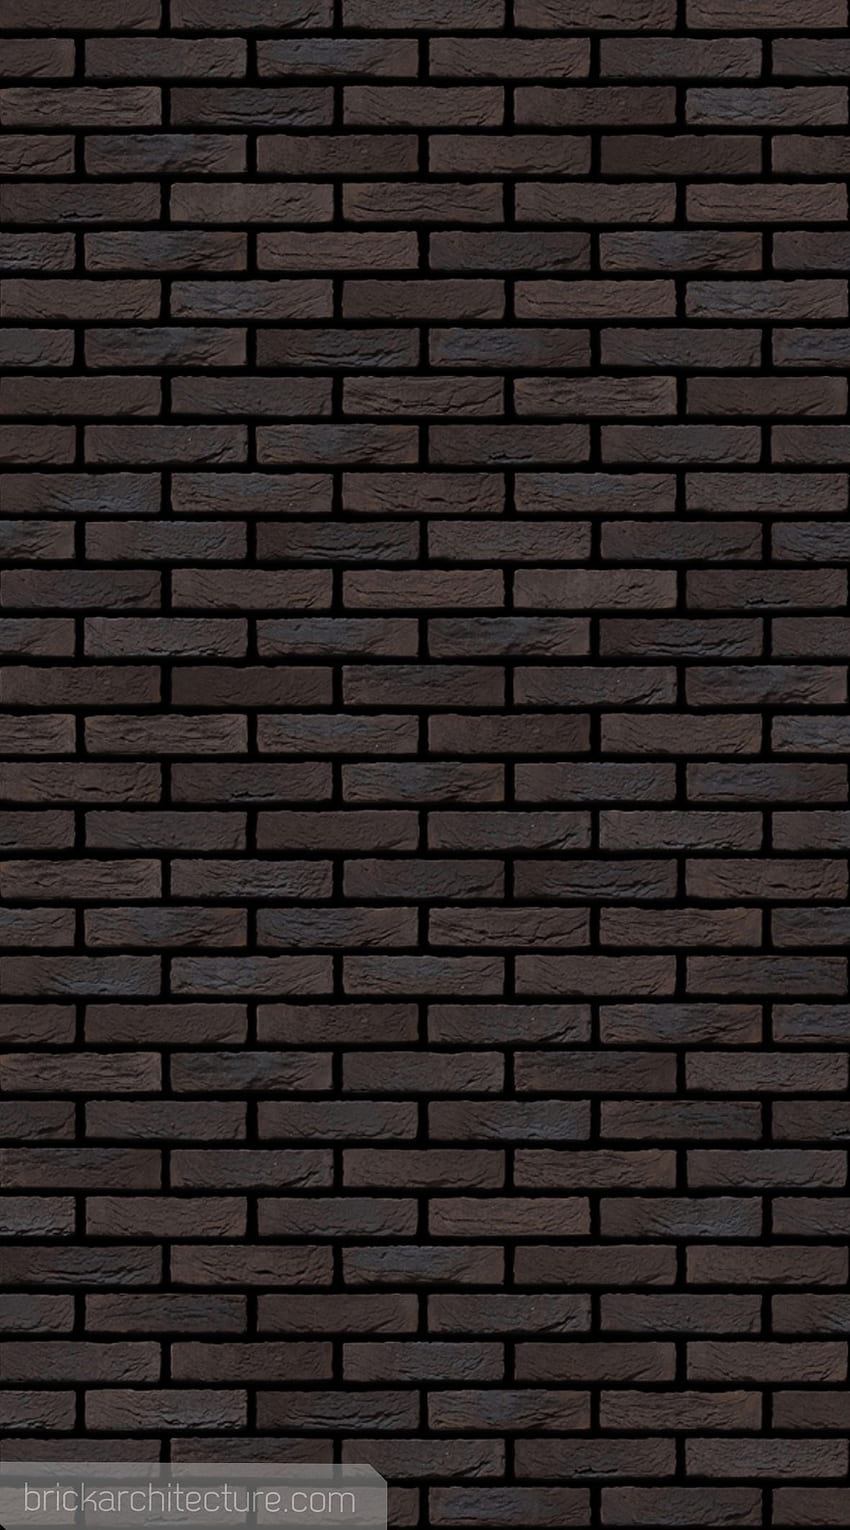 Js Trend WFM Brick Wallpaper in White Faux Foam Brick Wall Panels Peel and  Stick 70 x 77 cm Pack OF  1